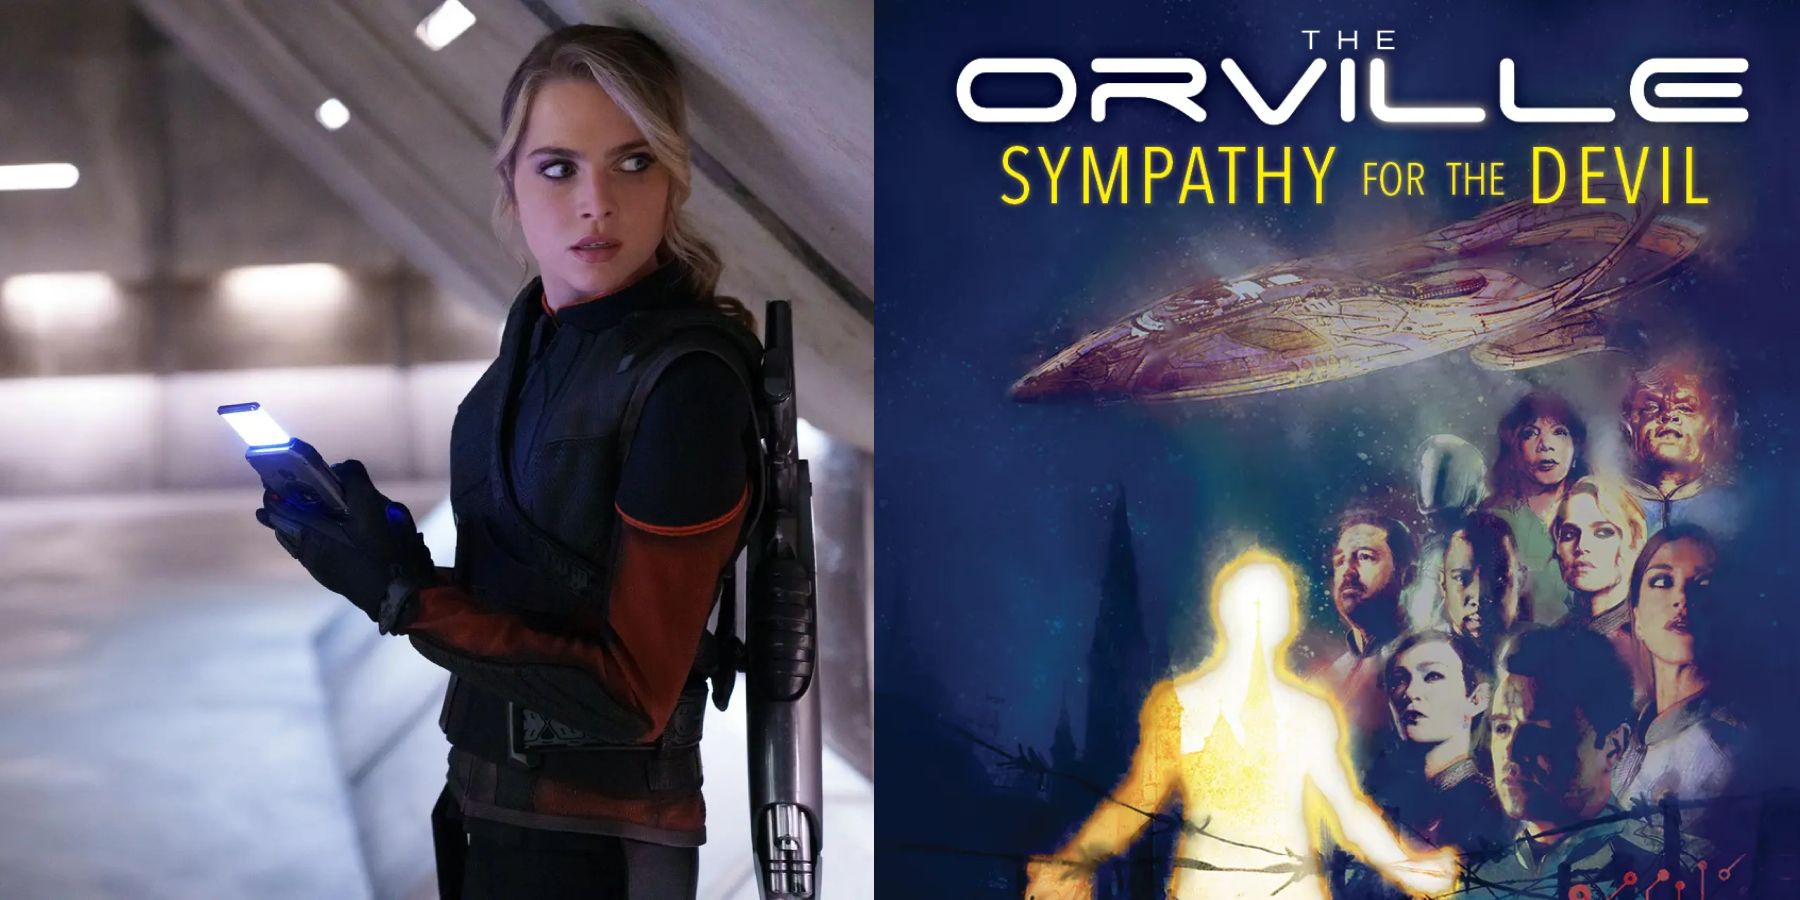 Anne Winters as Charly and The Orville: Sympathy for the Devil novella